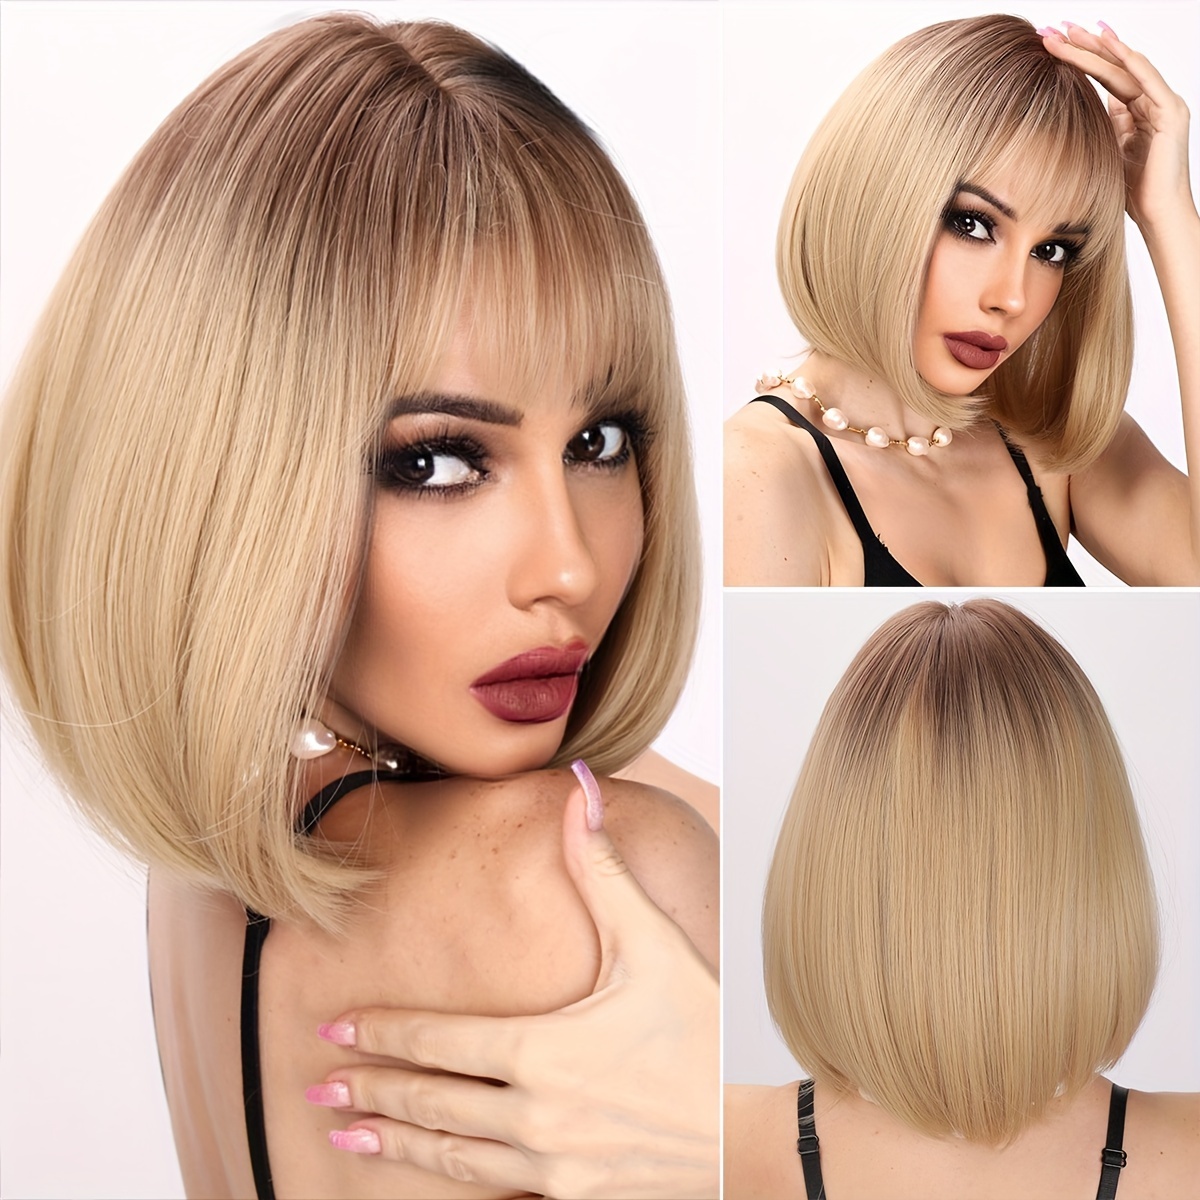 

Smilco 14 Inch Light Brown High Gloss Dyed Fashionable Bangs Straight Hair Wig Bob Wig, Women's Headwear Synthetic Fiber Wig - Heat-resistant, Easy To Shape, Rose Mesh Hat To Create A Daily Look